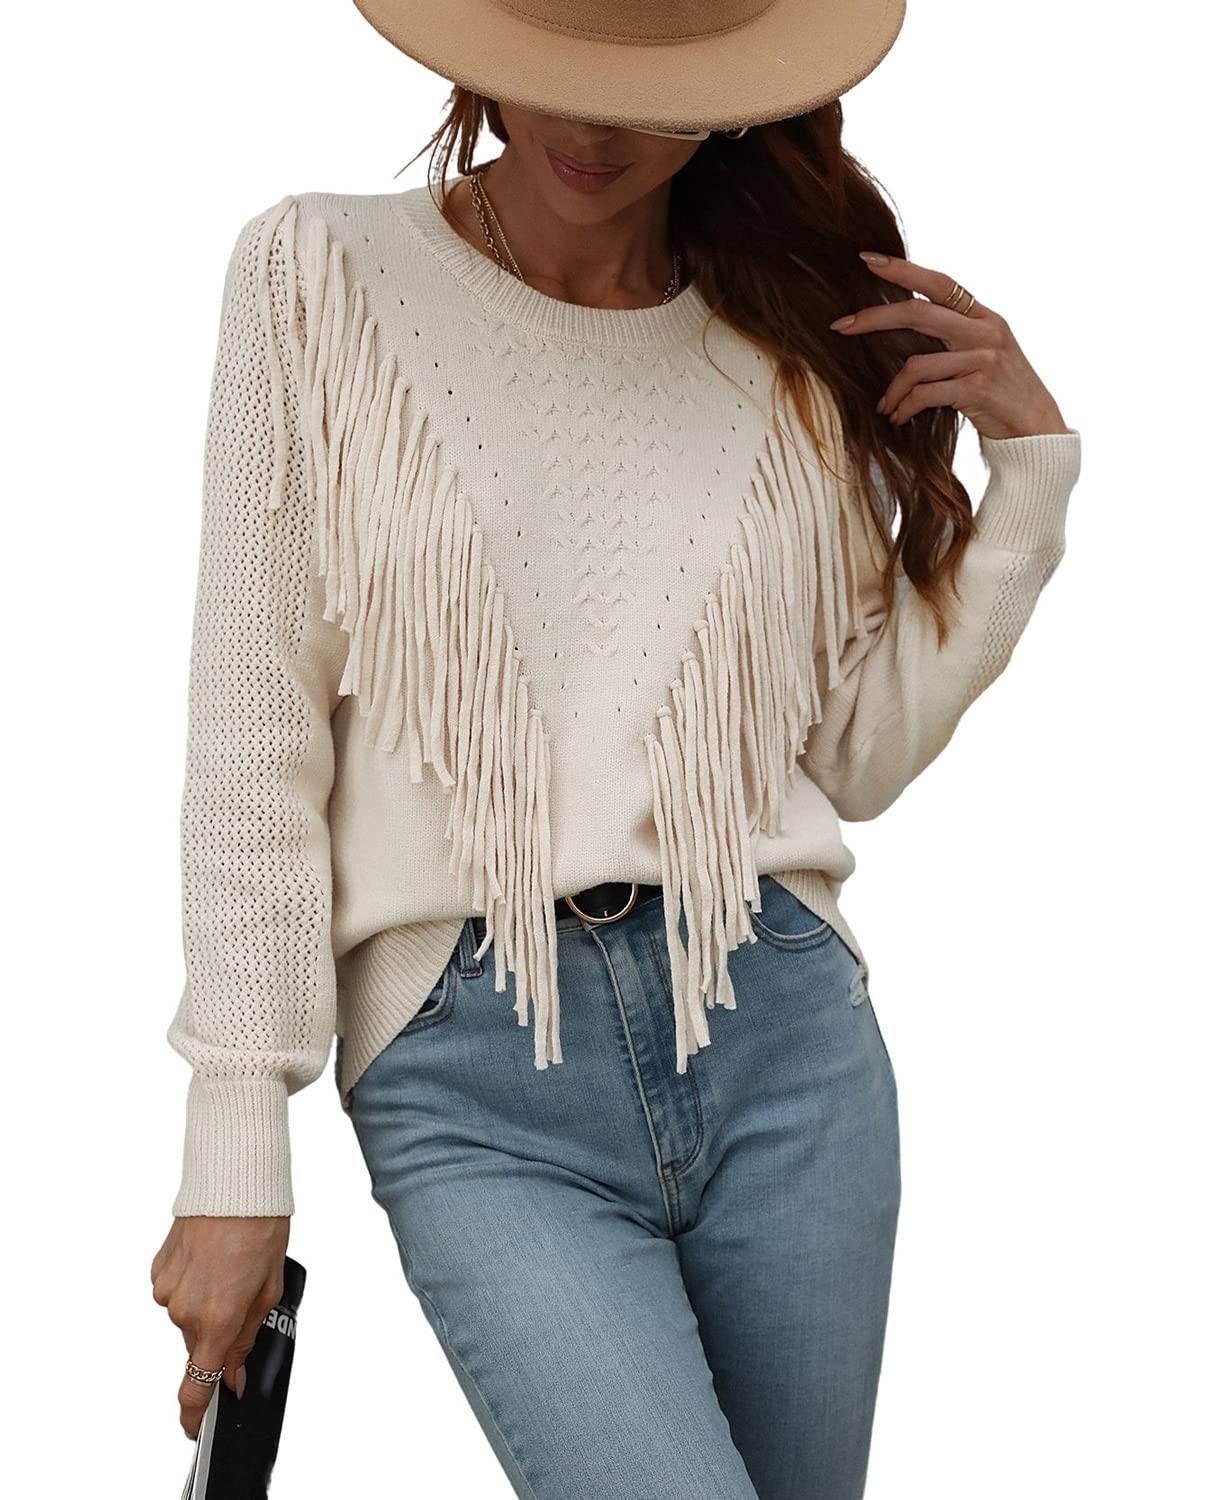 Chouyatou Women's Casual Crewneck Fringe Tassel Knitted Pullover